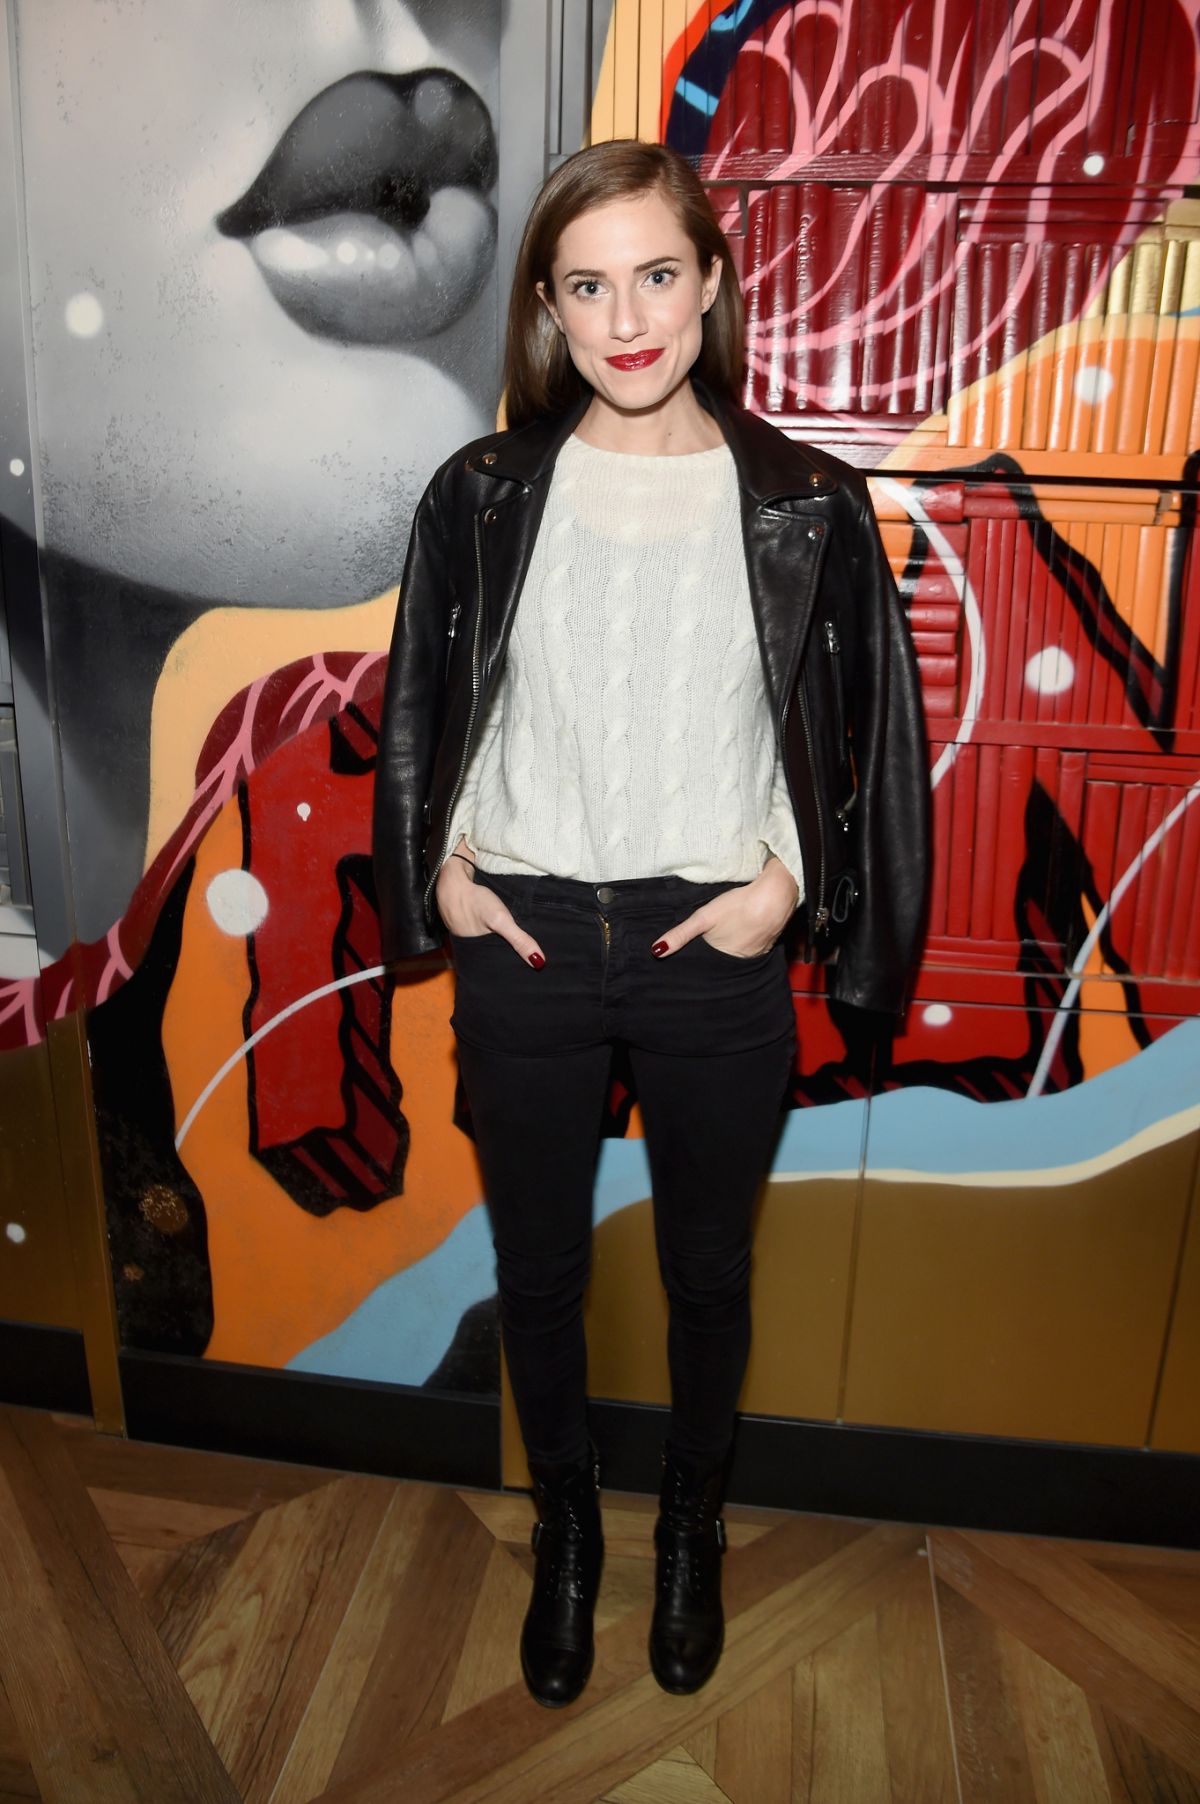 allison-williams-attends-the-vandal-grand-opening-in-new-york-city_4.jpg